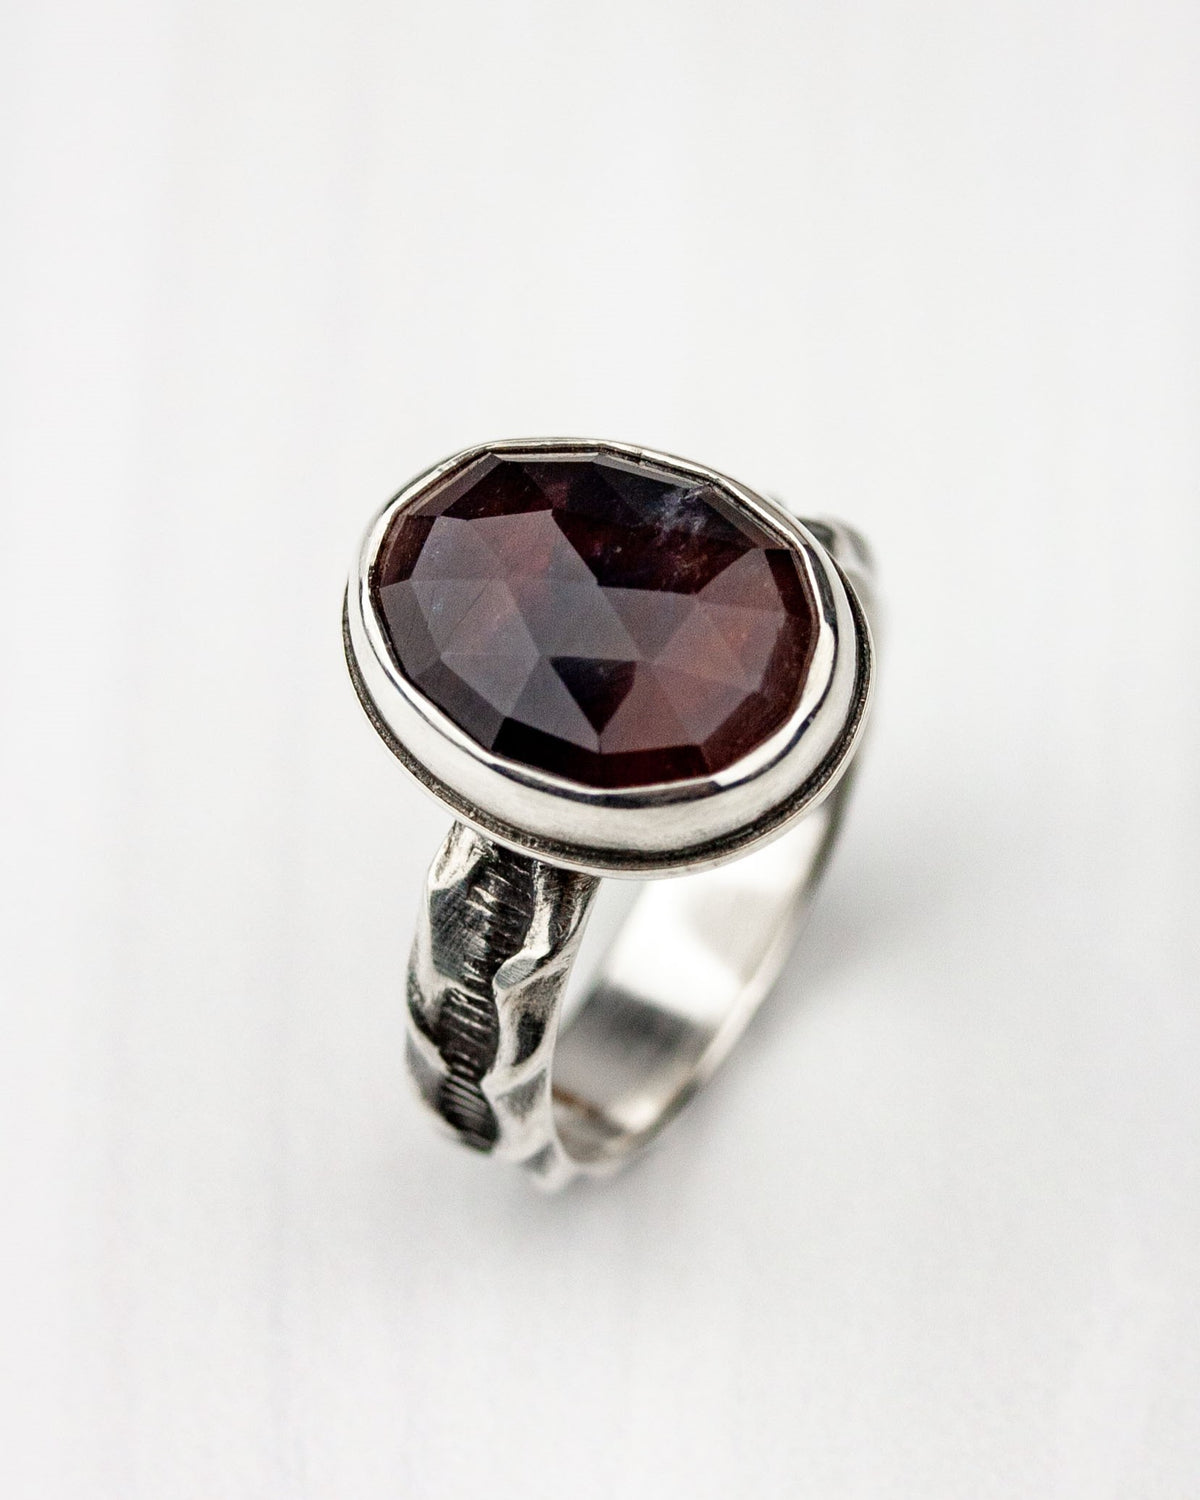 Maroon sapphire ring on white background